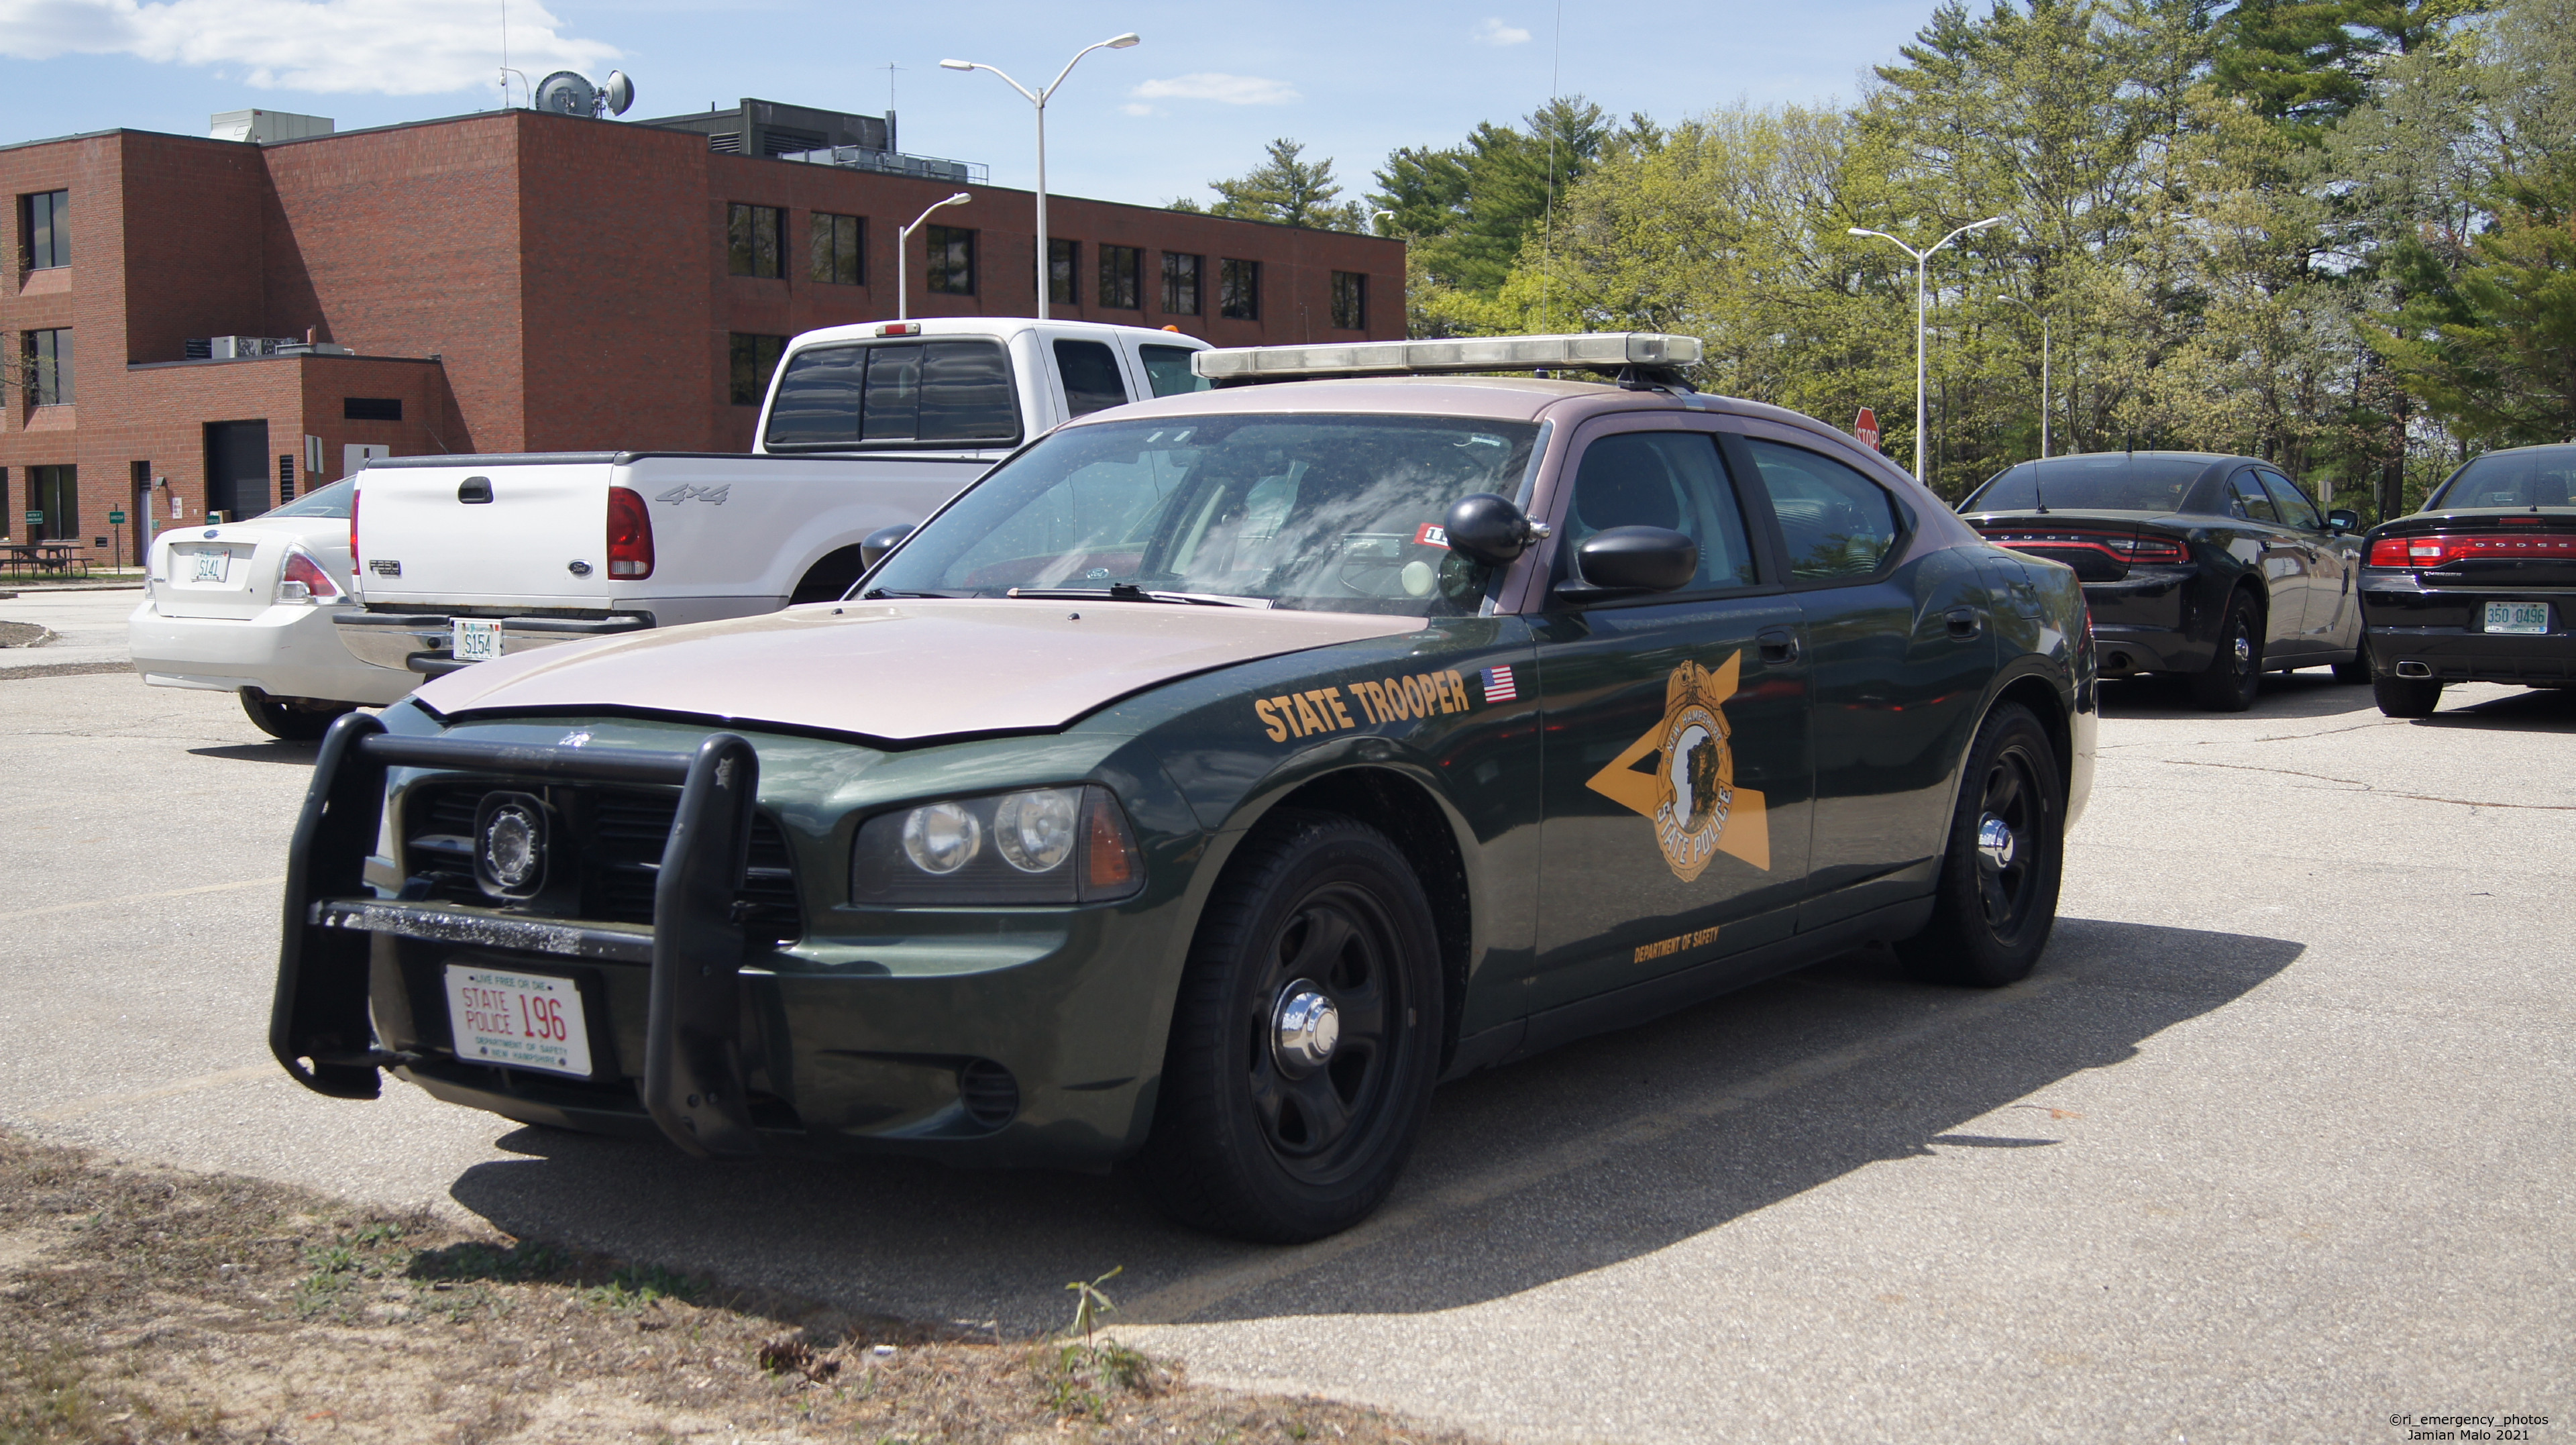 A photo  of New Hampshire State Police
            Cruiser 196, a 2006-2010 Dodge Charger             taken by Jamian Malo